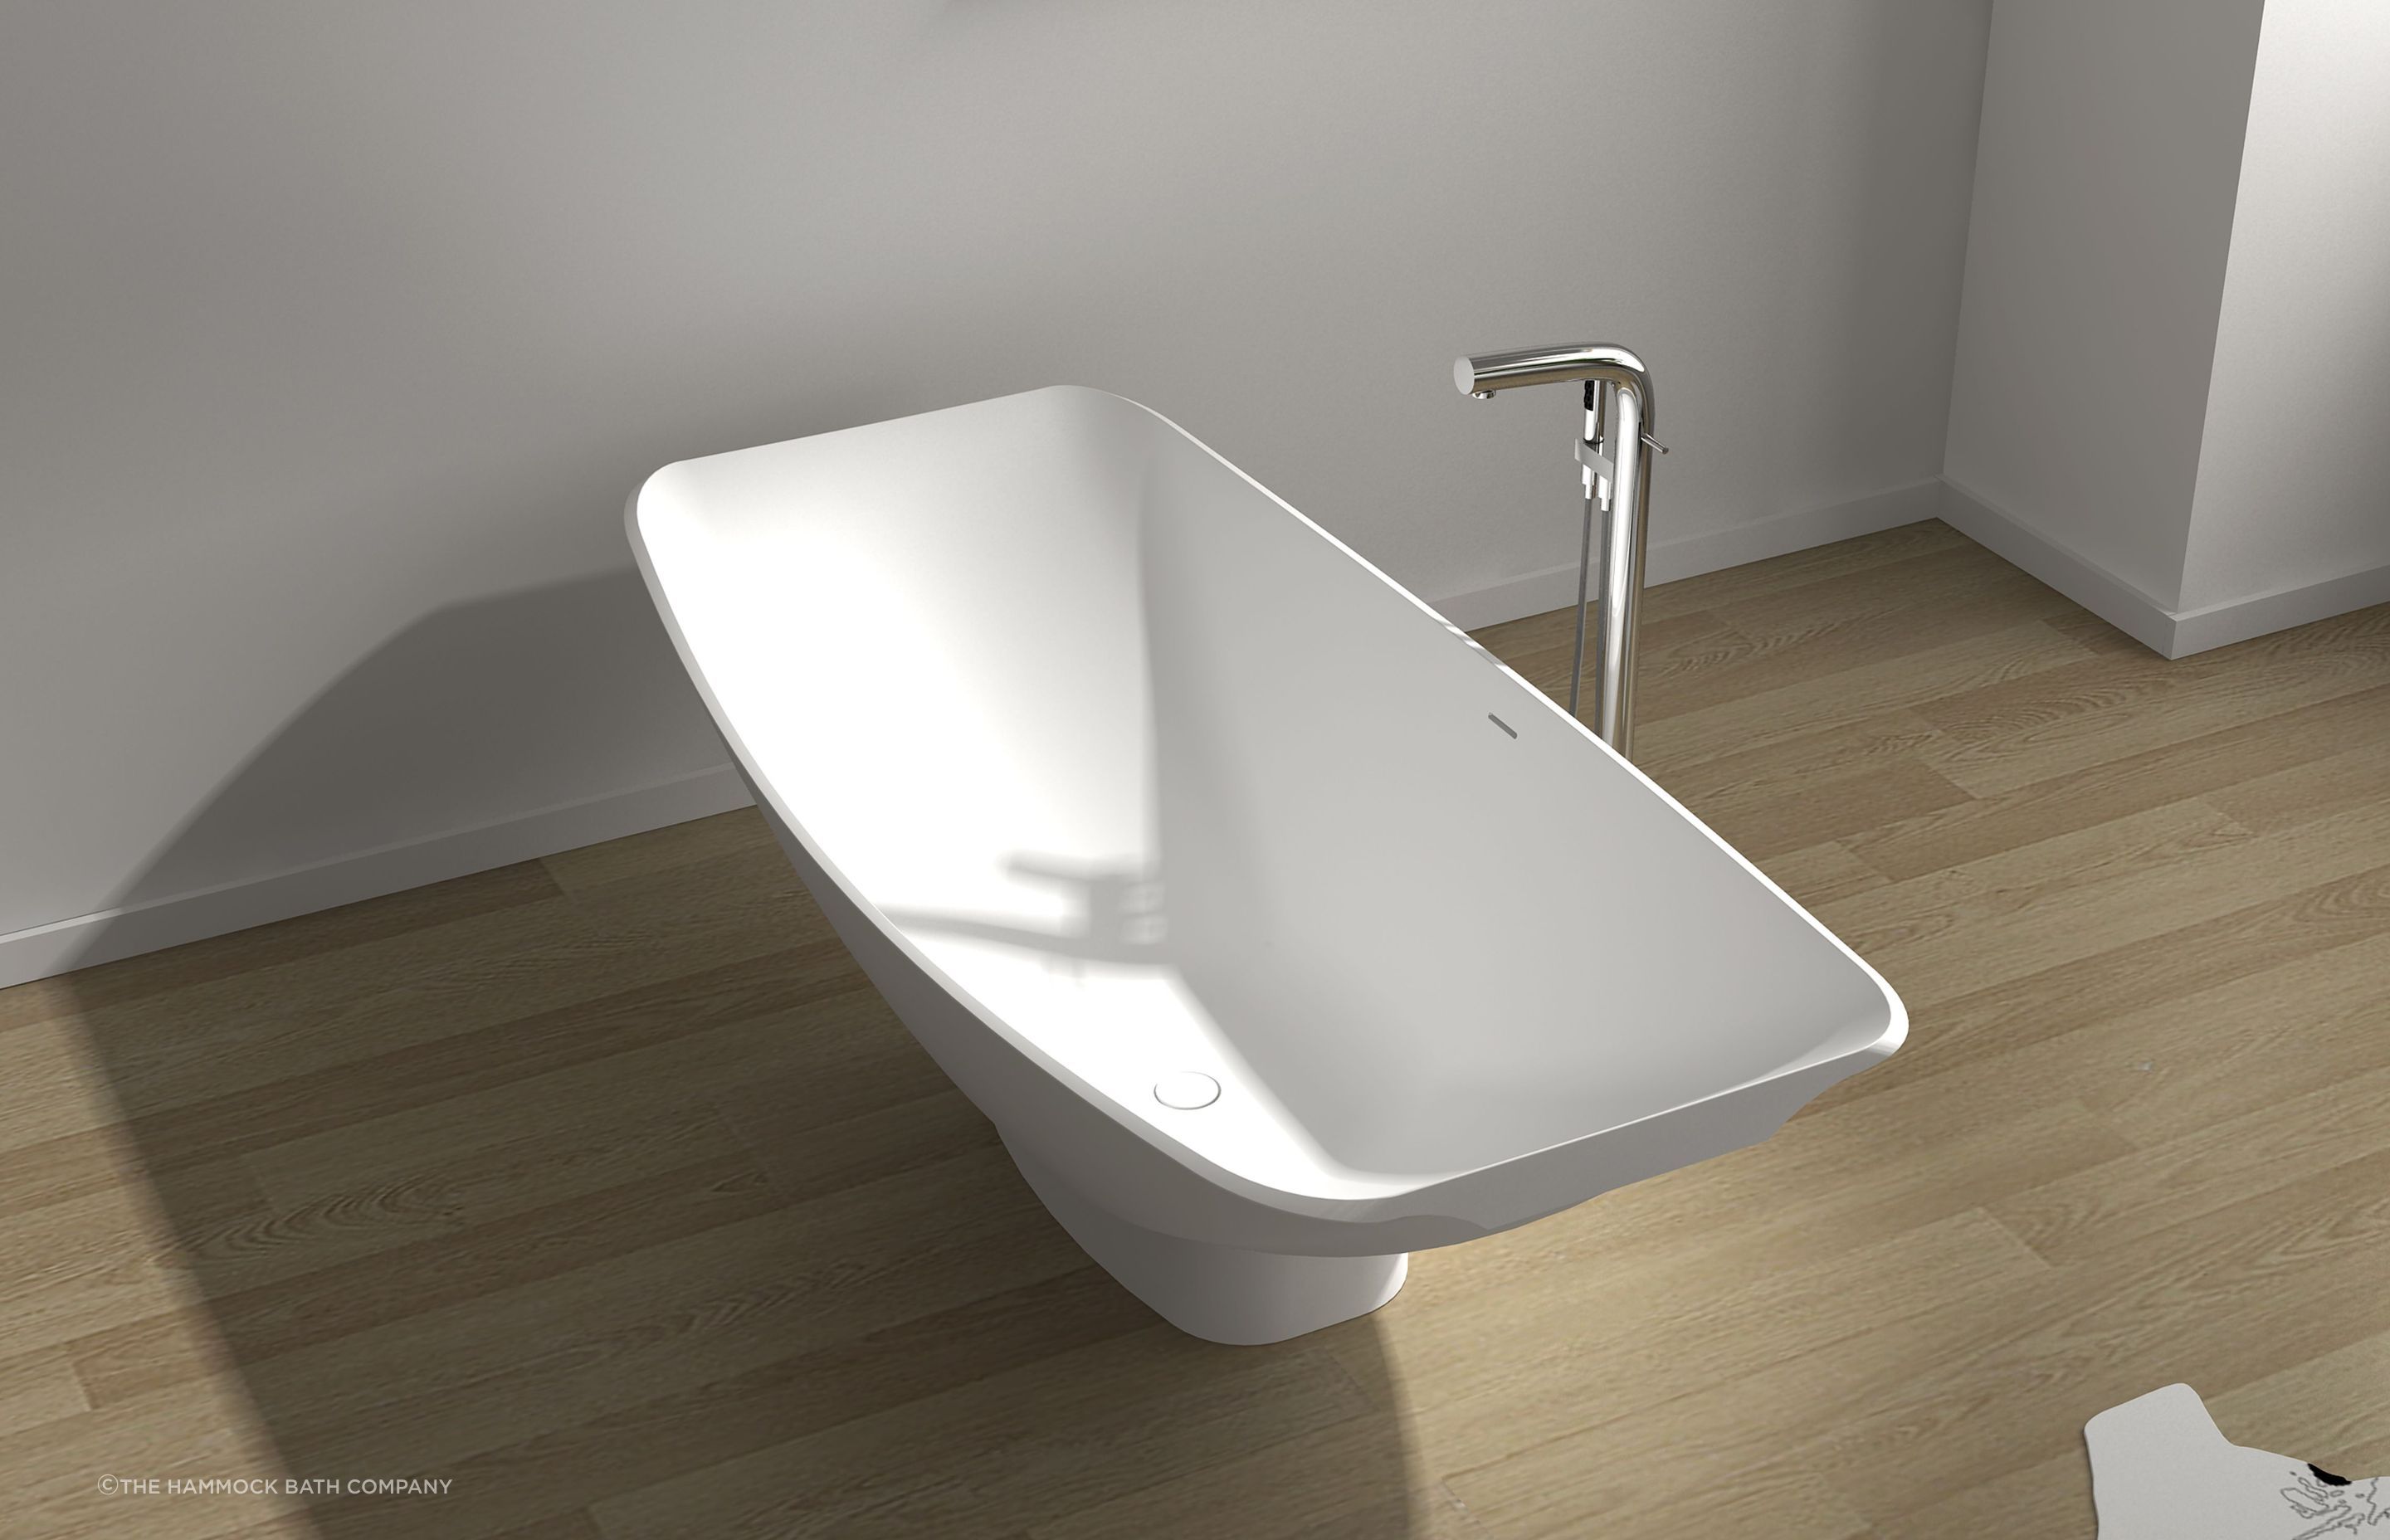 Contemporary bathtubs come in all shapes and sizes. Featured Product: Mirage Bath Tub by The Hammock Bath Company